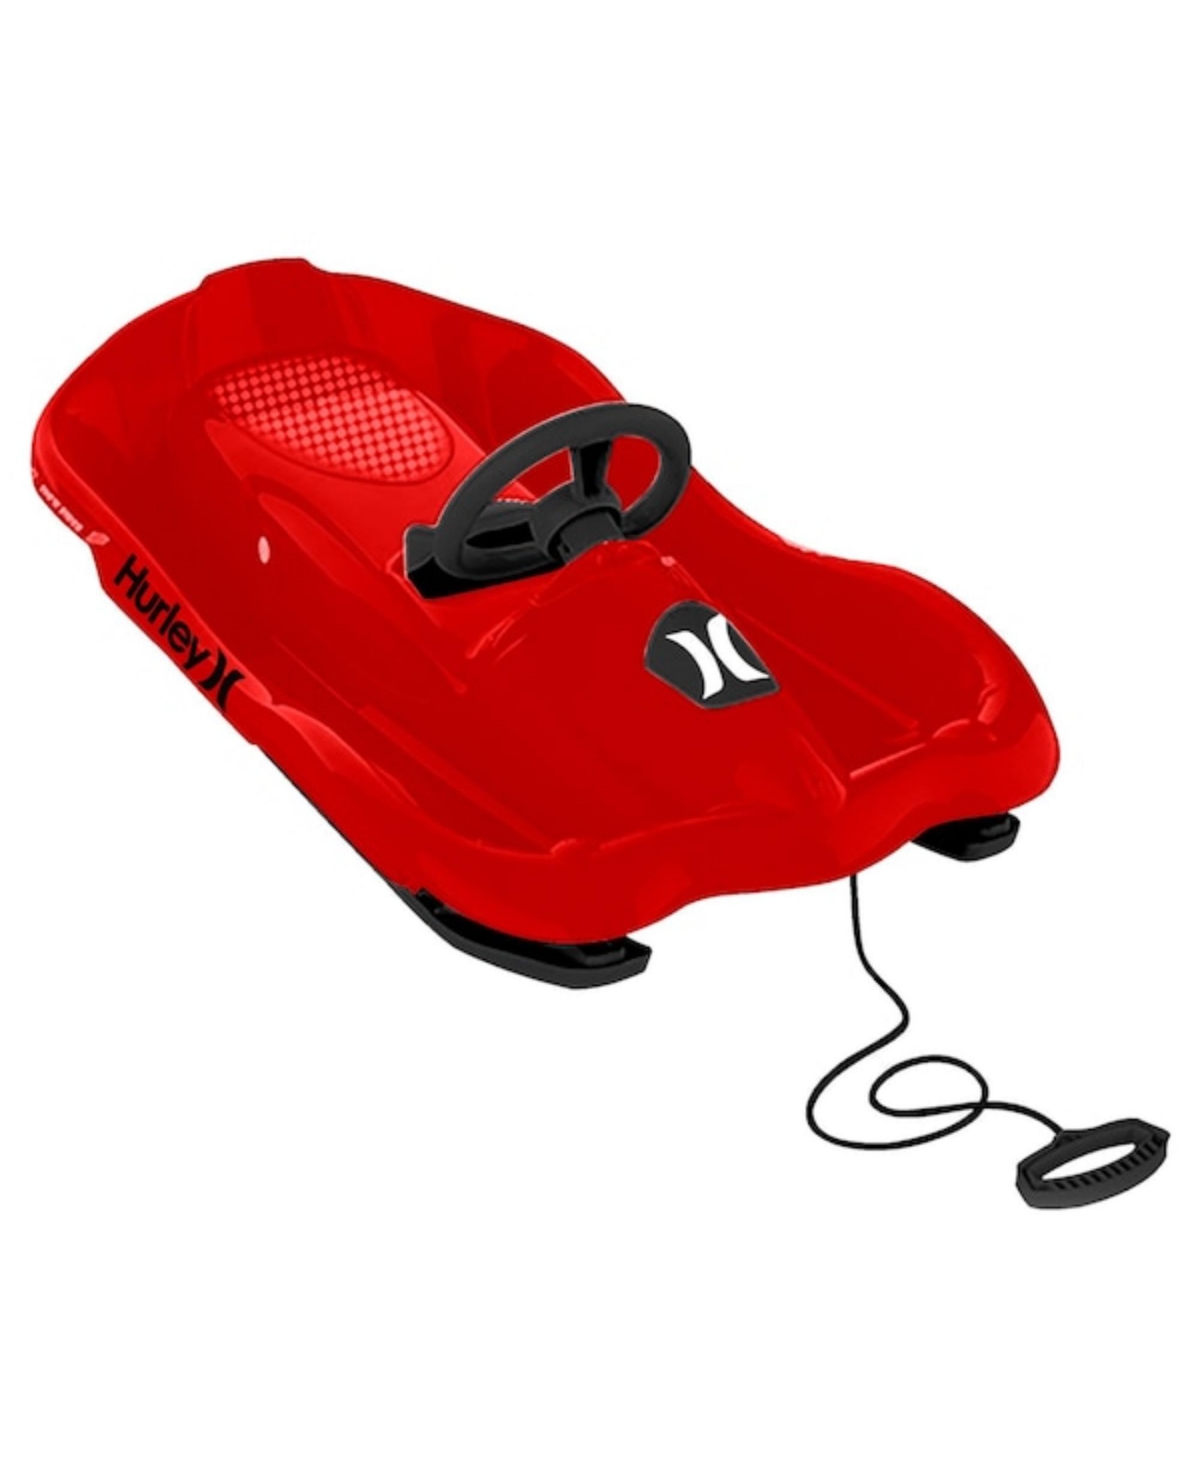 Hurley Kids Steerable Snow Sled In Red